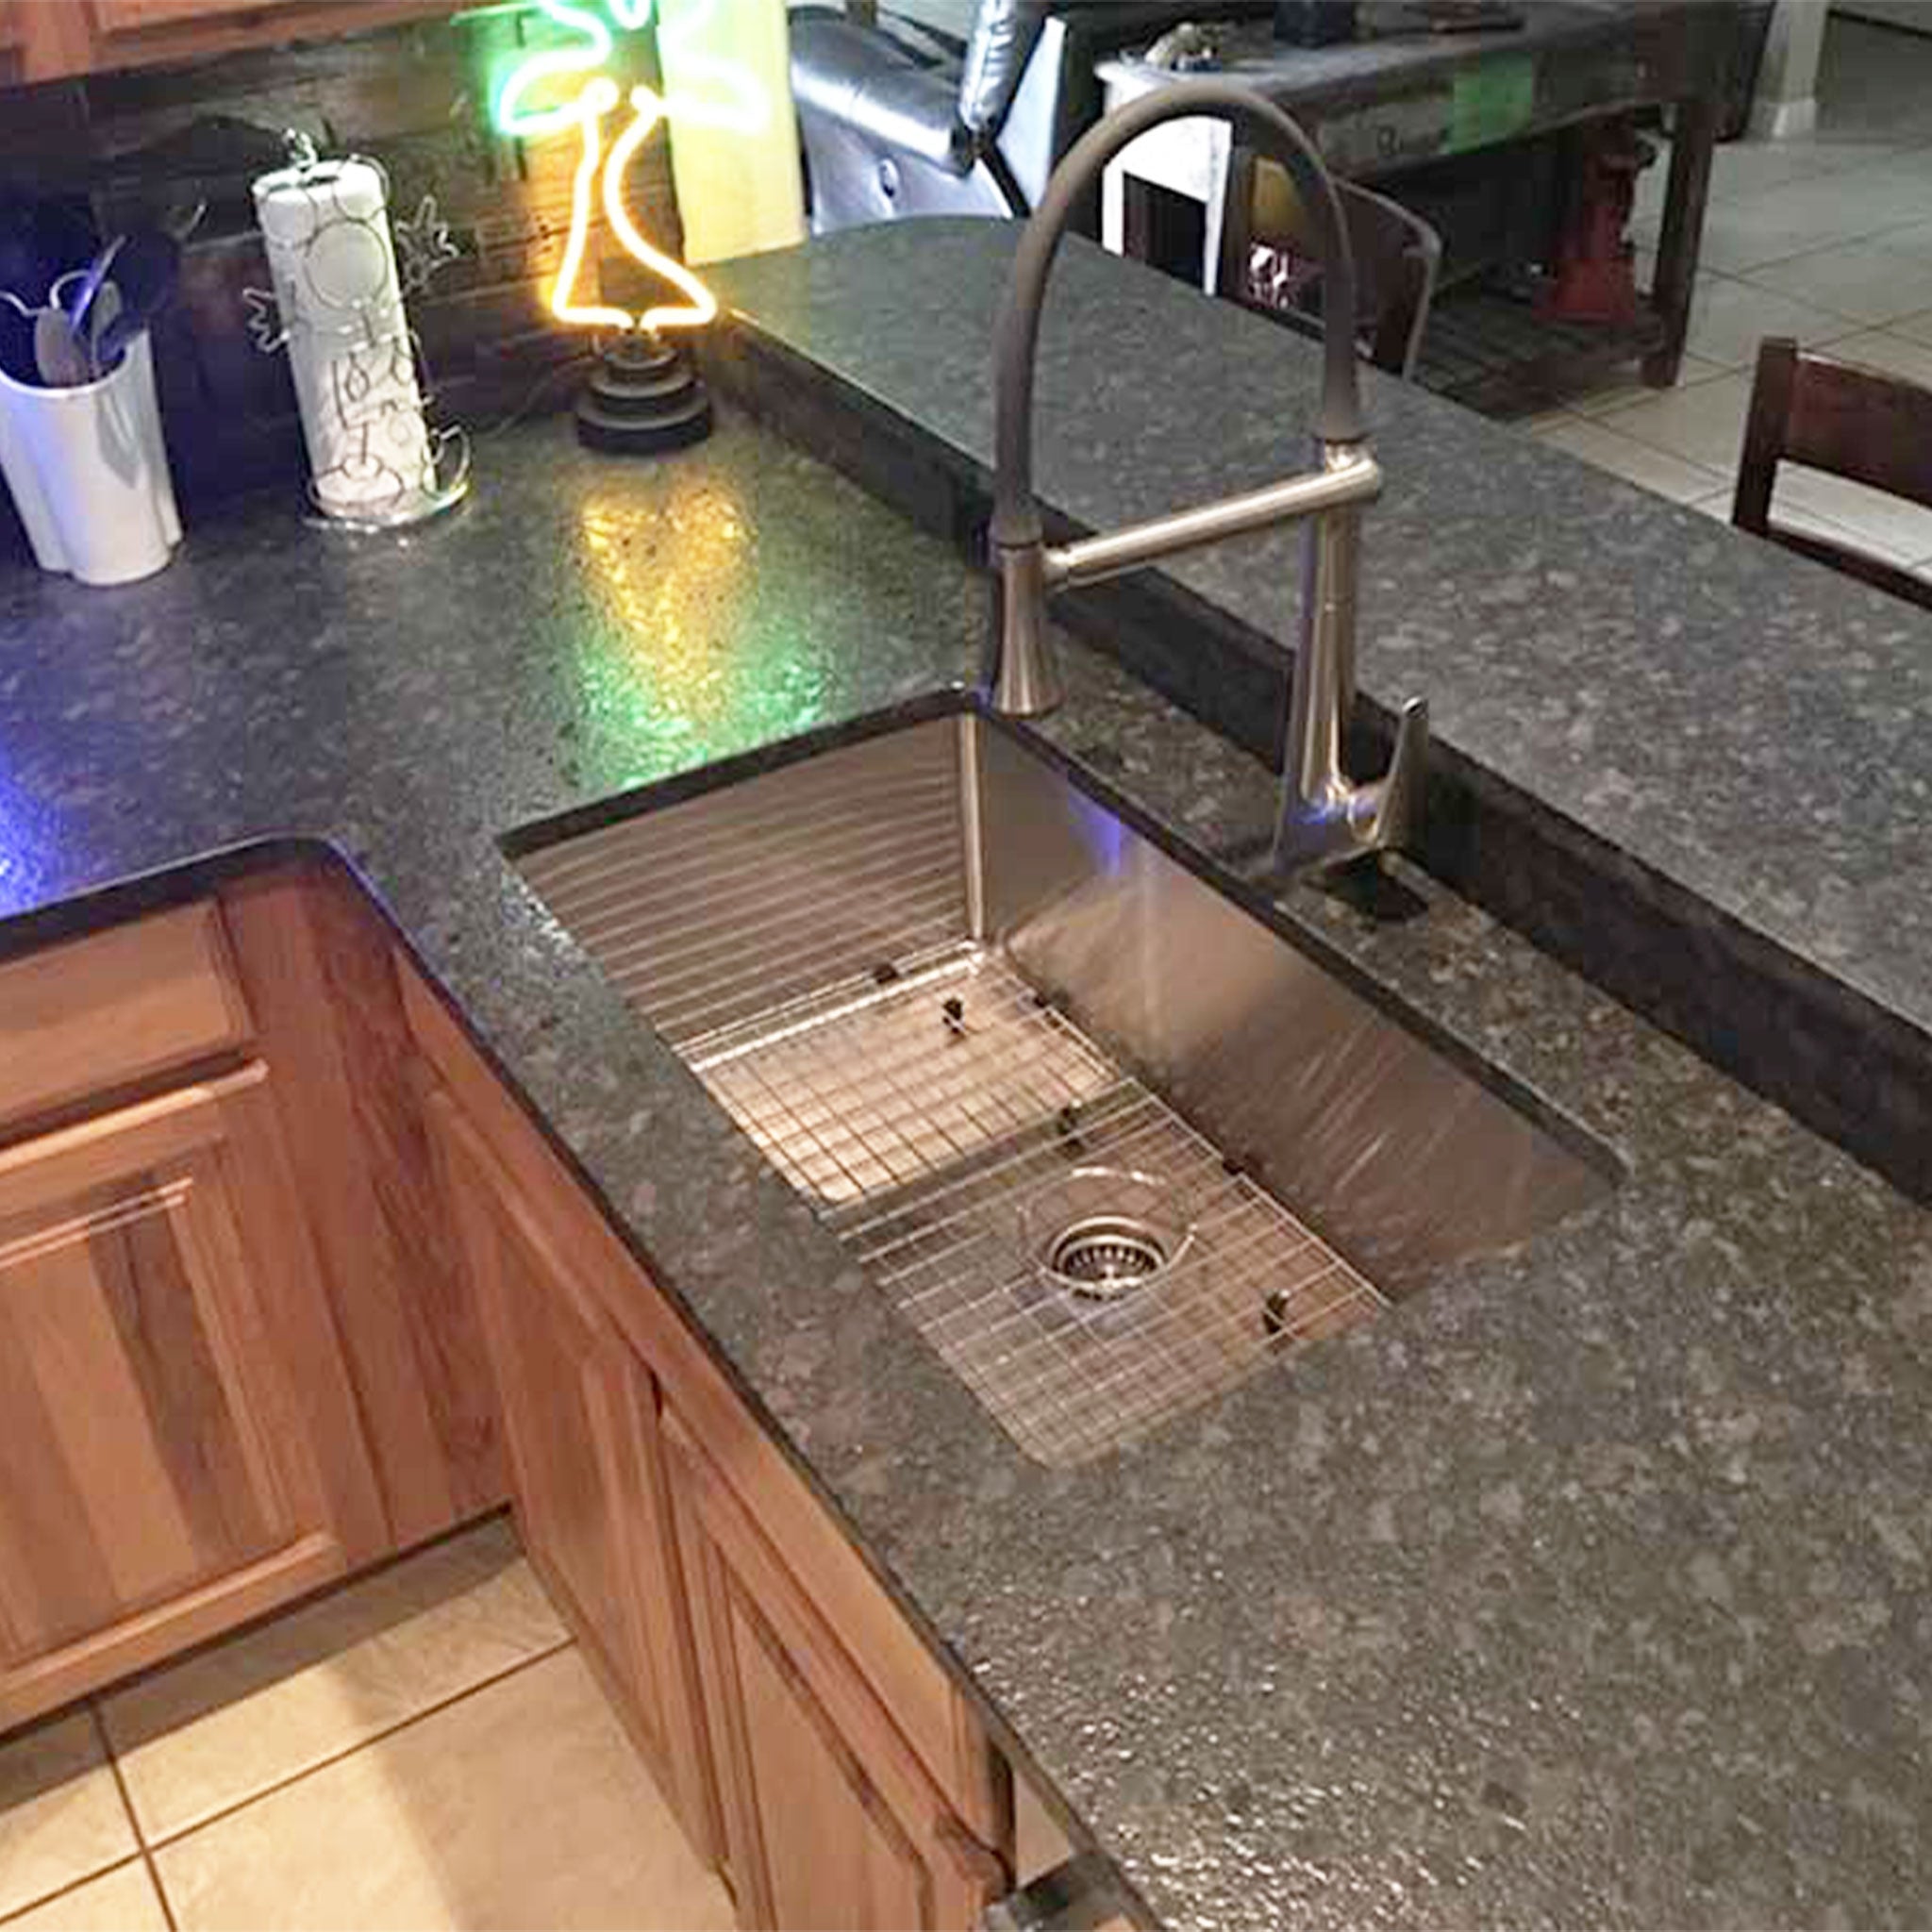 32" Single Basin Under the Sink with a unified drain hole